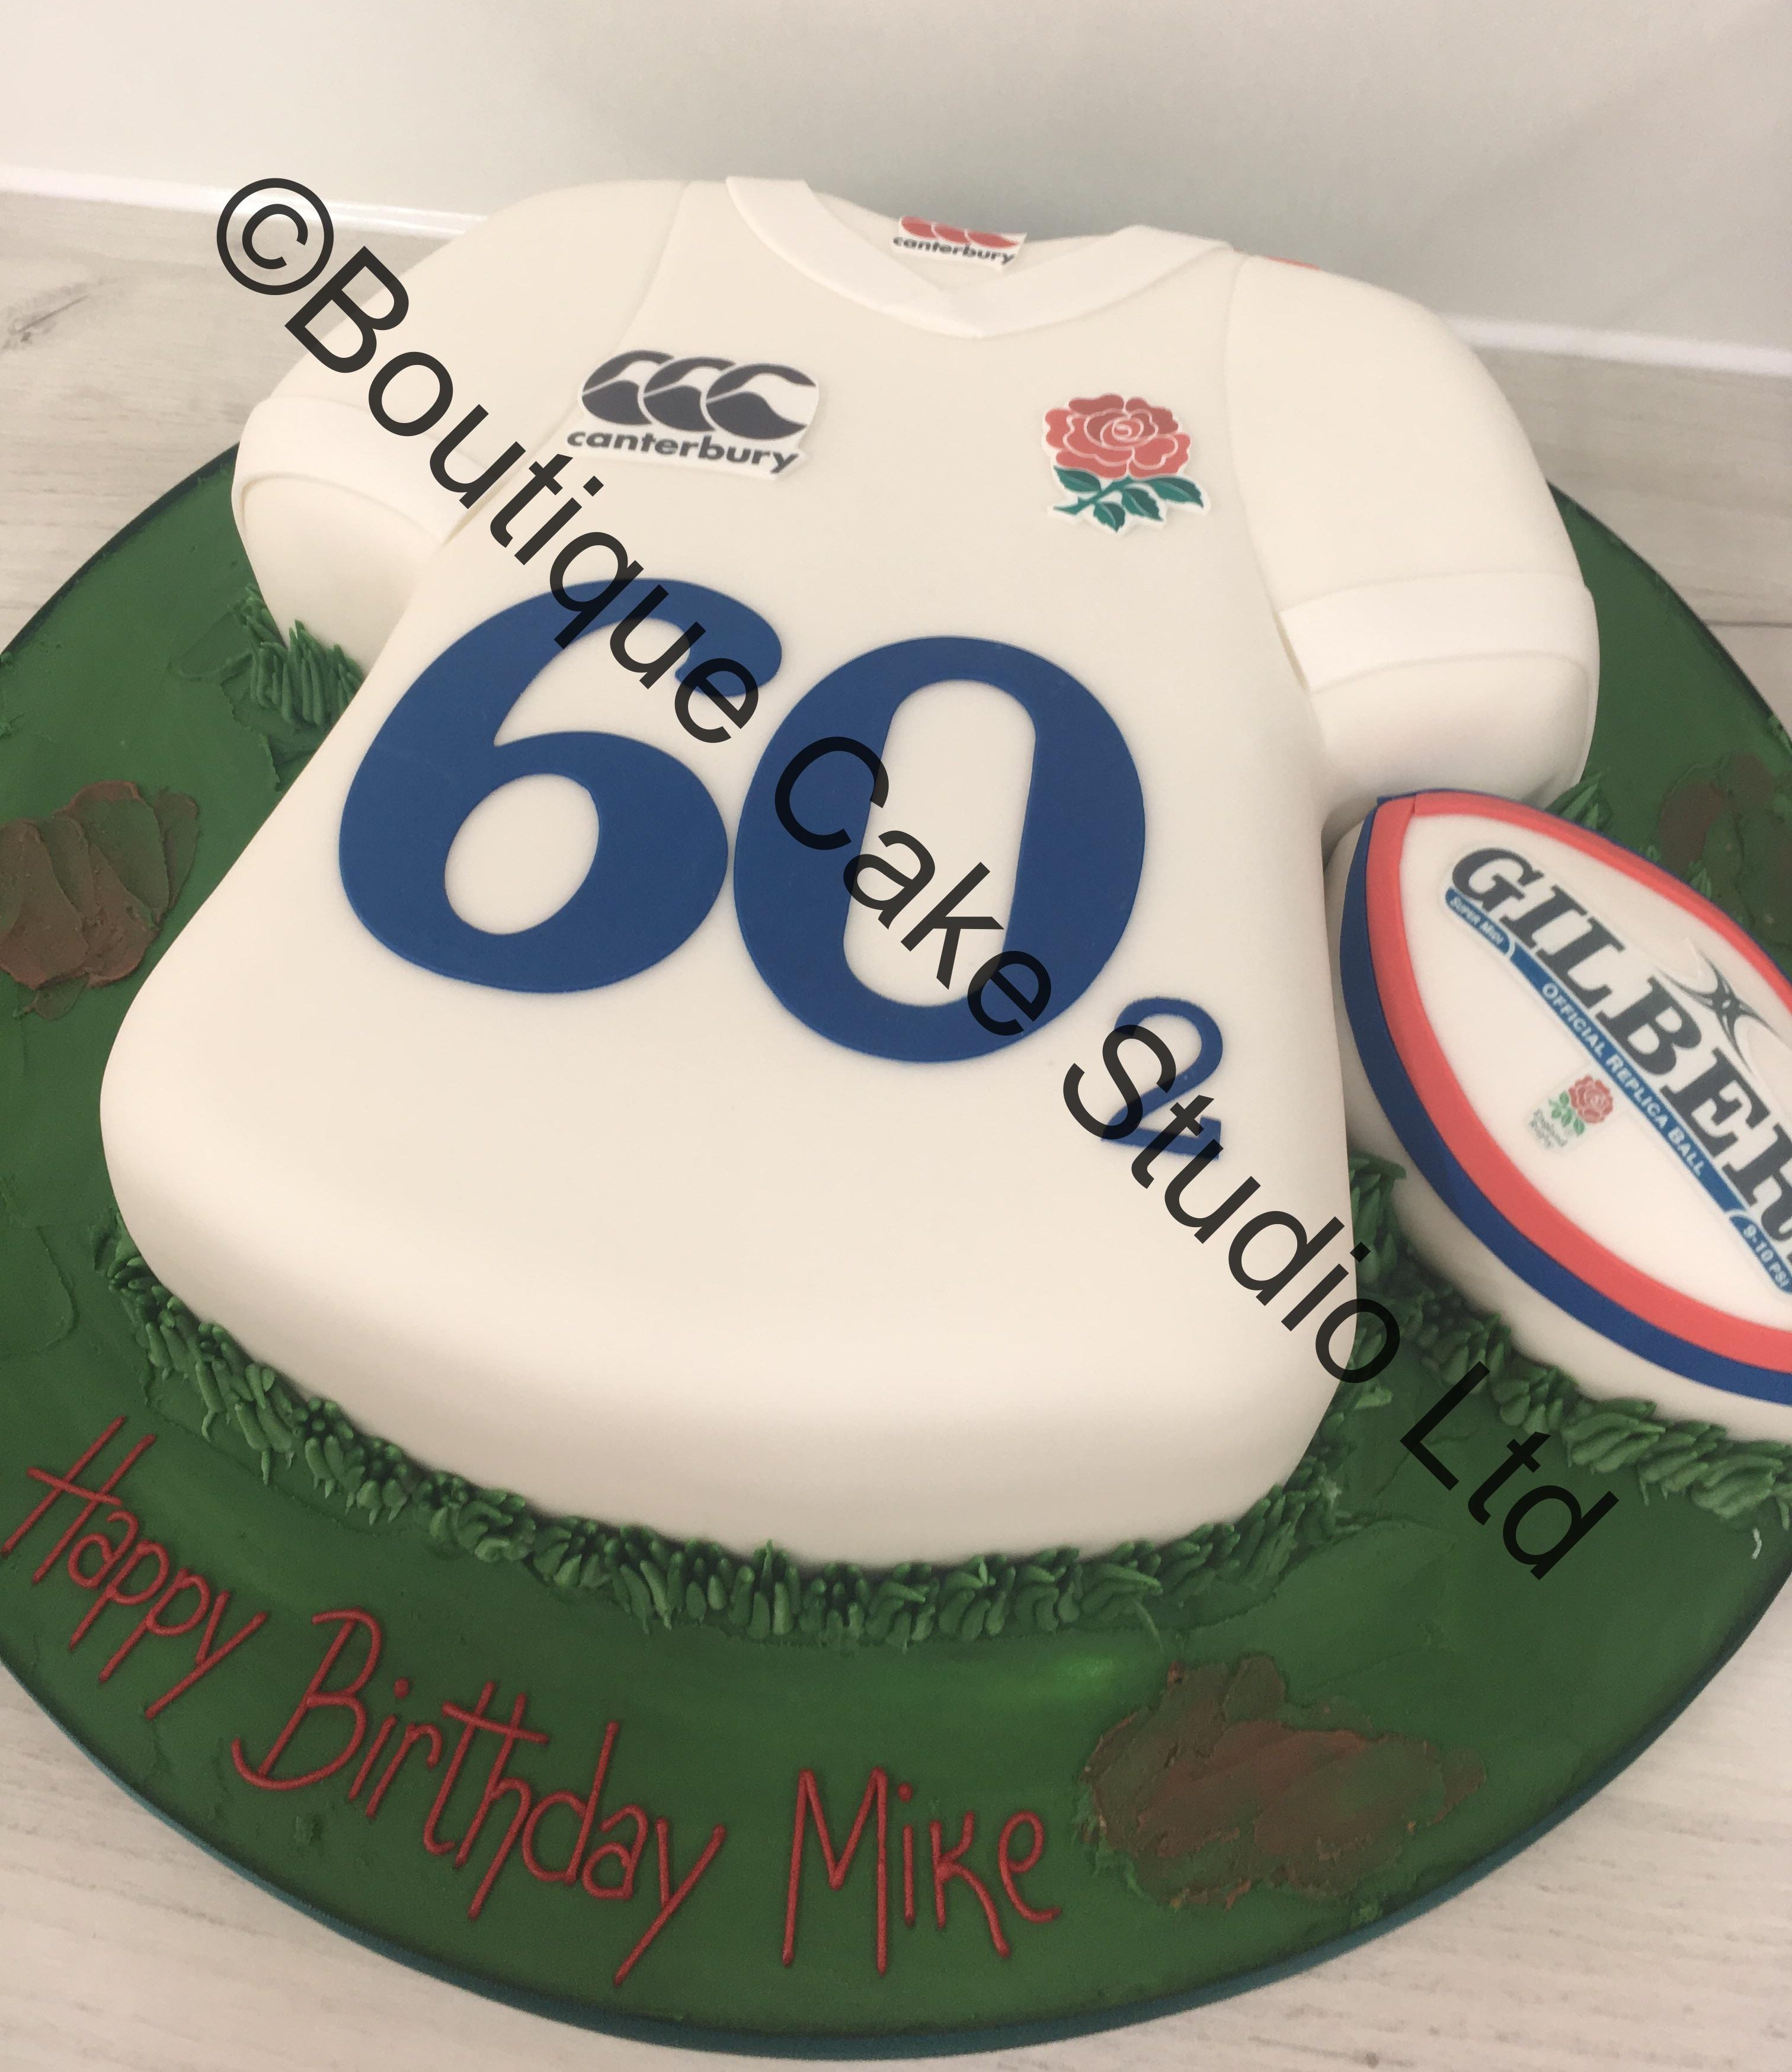 England Rugby Shirt Cake with larger ball